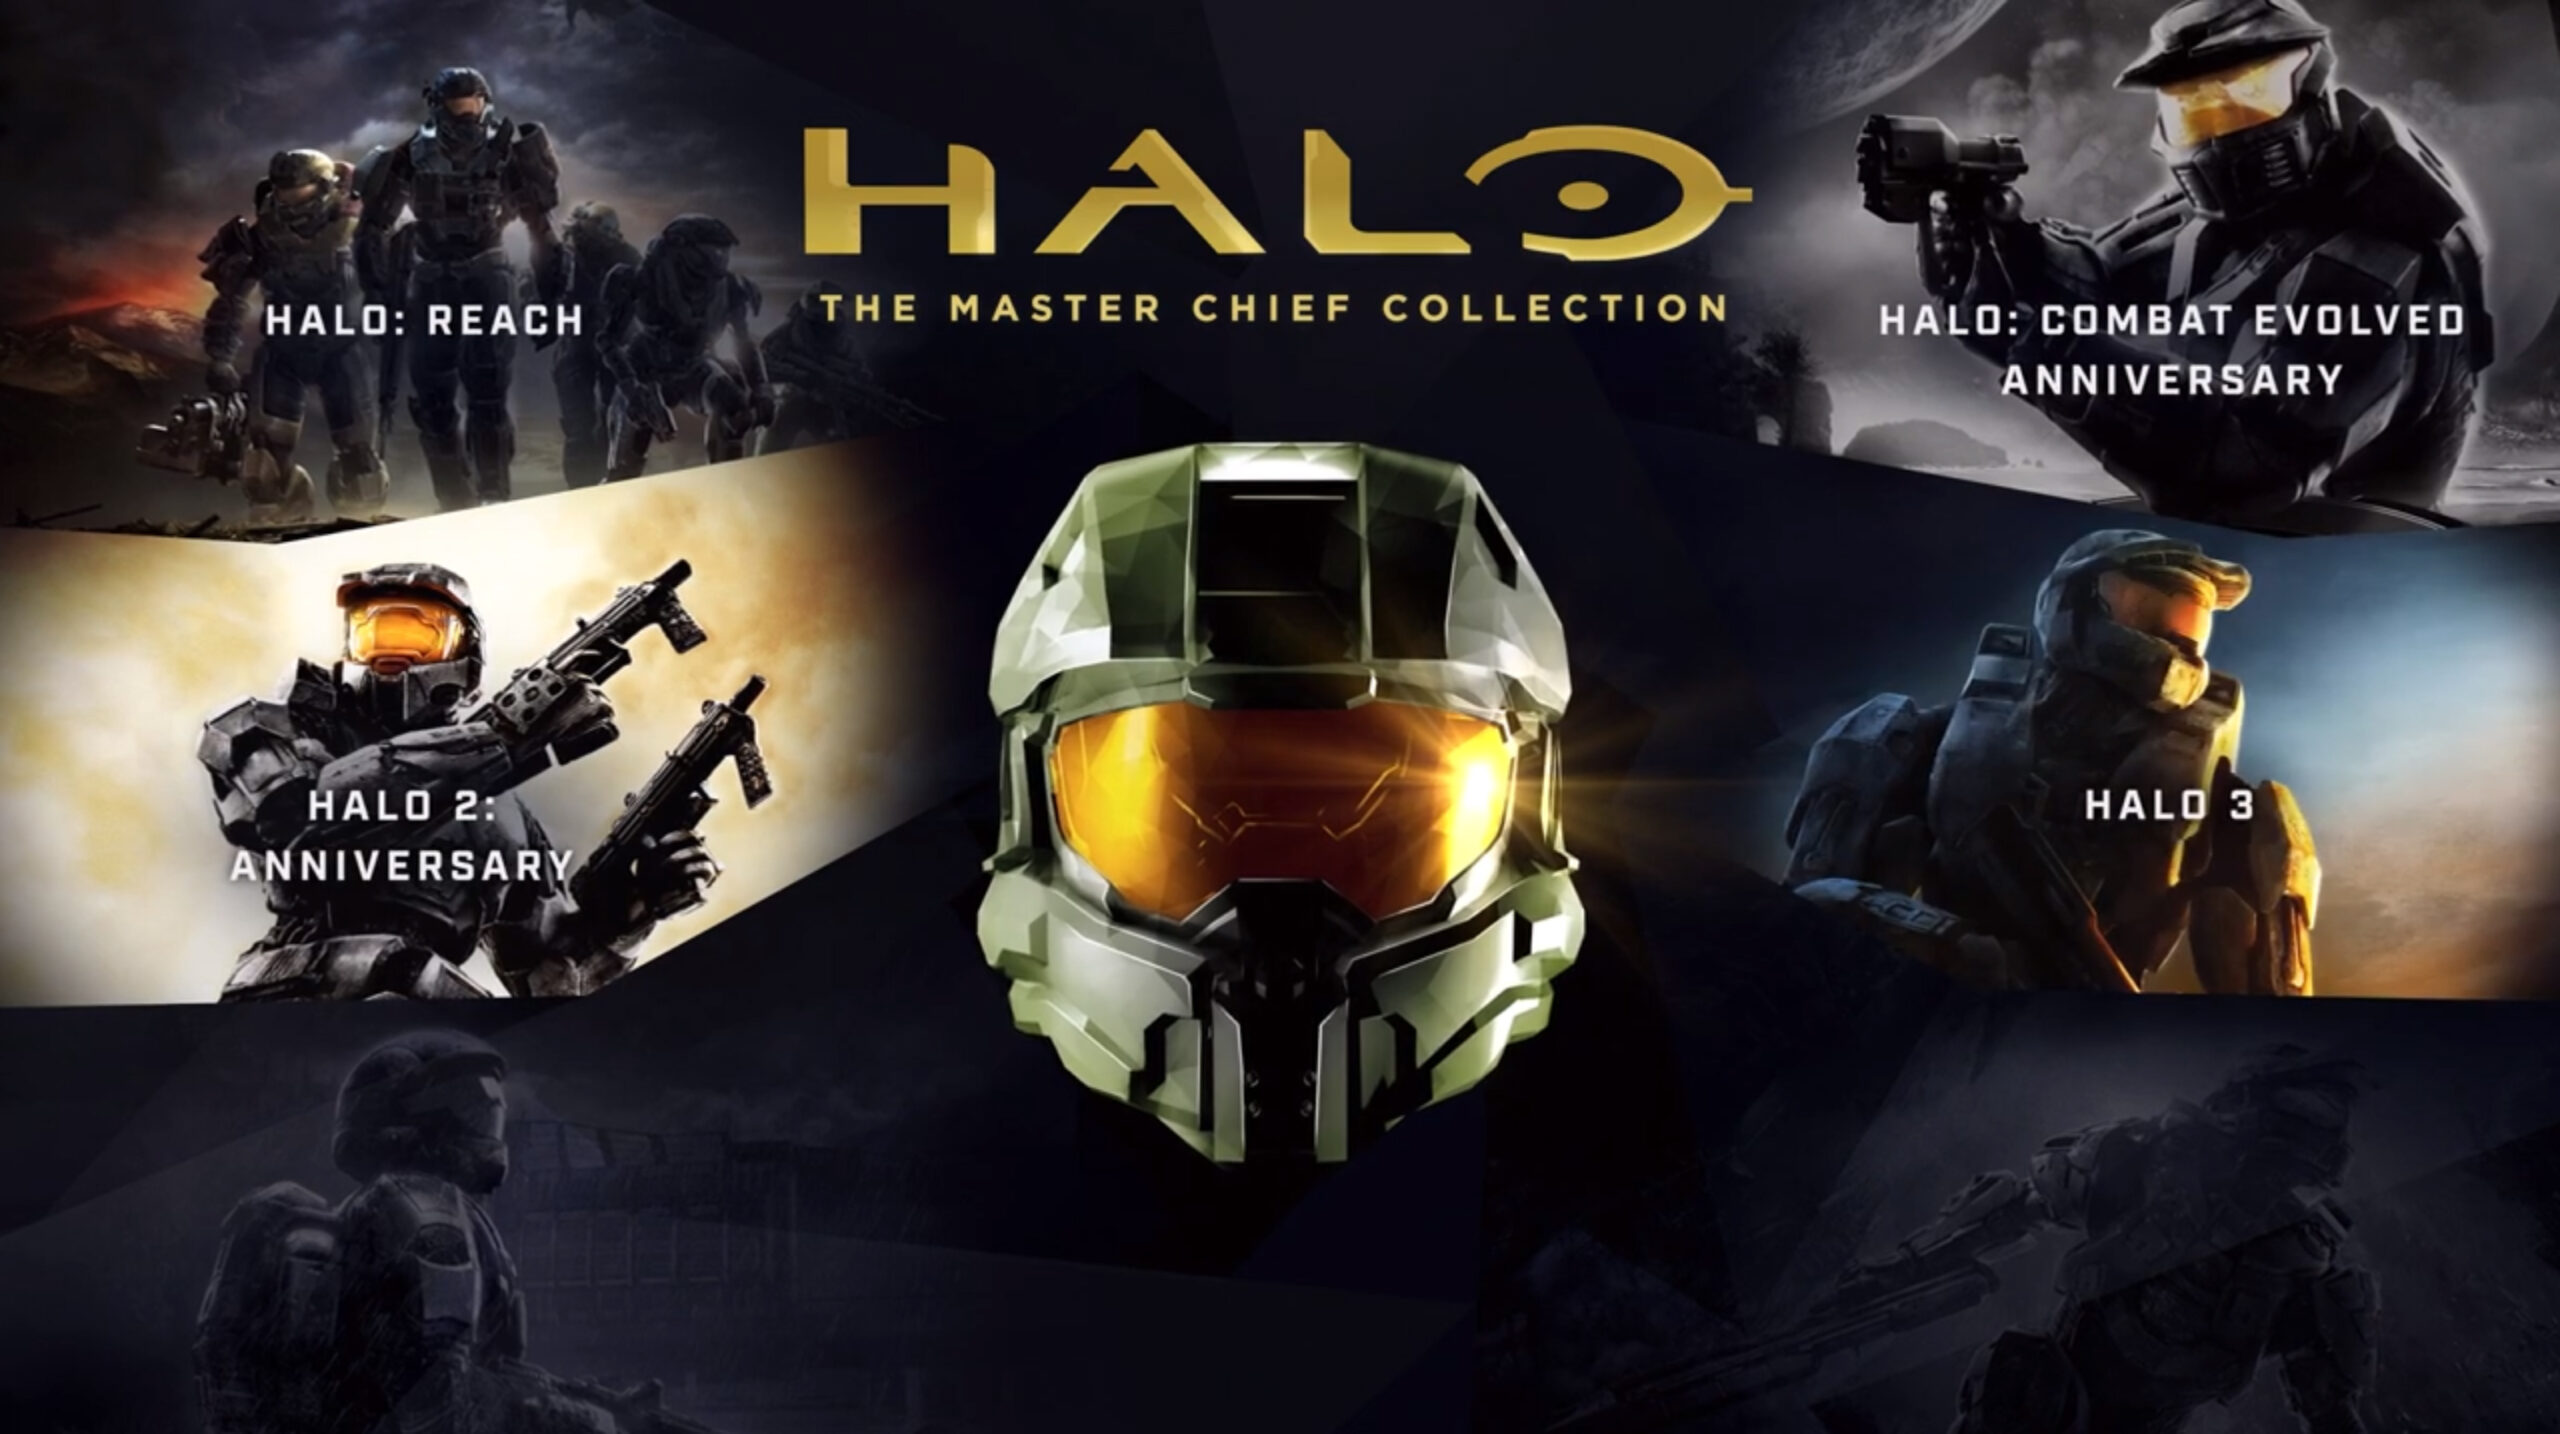 Halo-The-Master-Chief-Collection-Halo-3-scaled-1.jpg